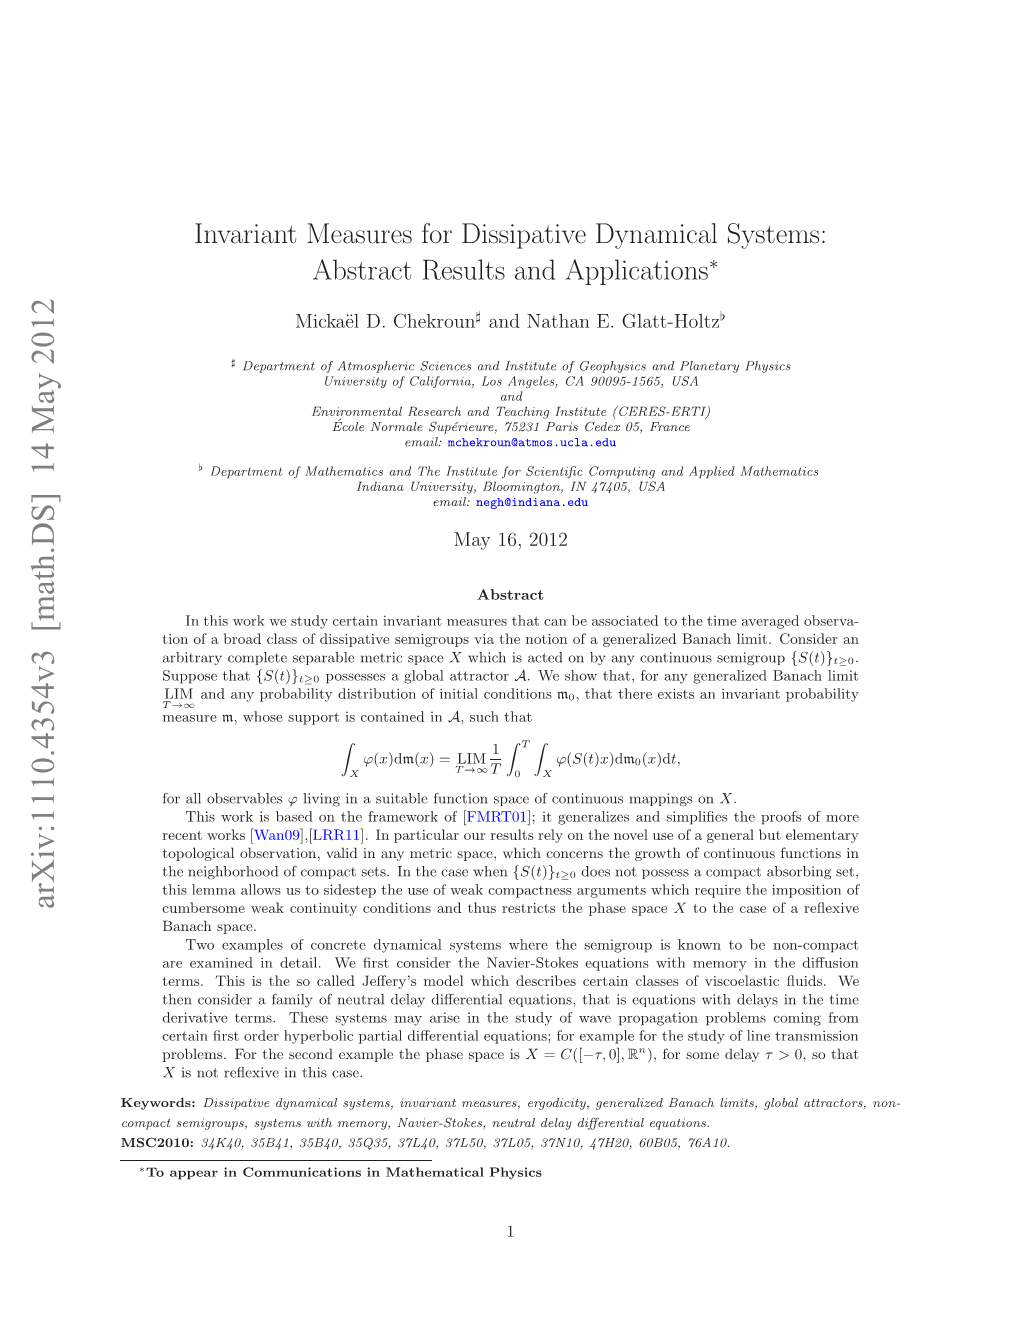 Invariant Measures for Dissipative Dynamical Systems